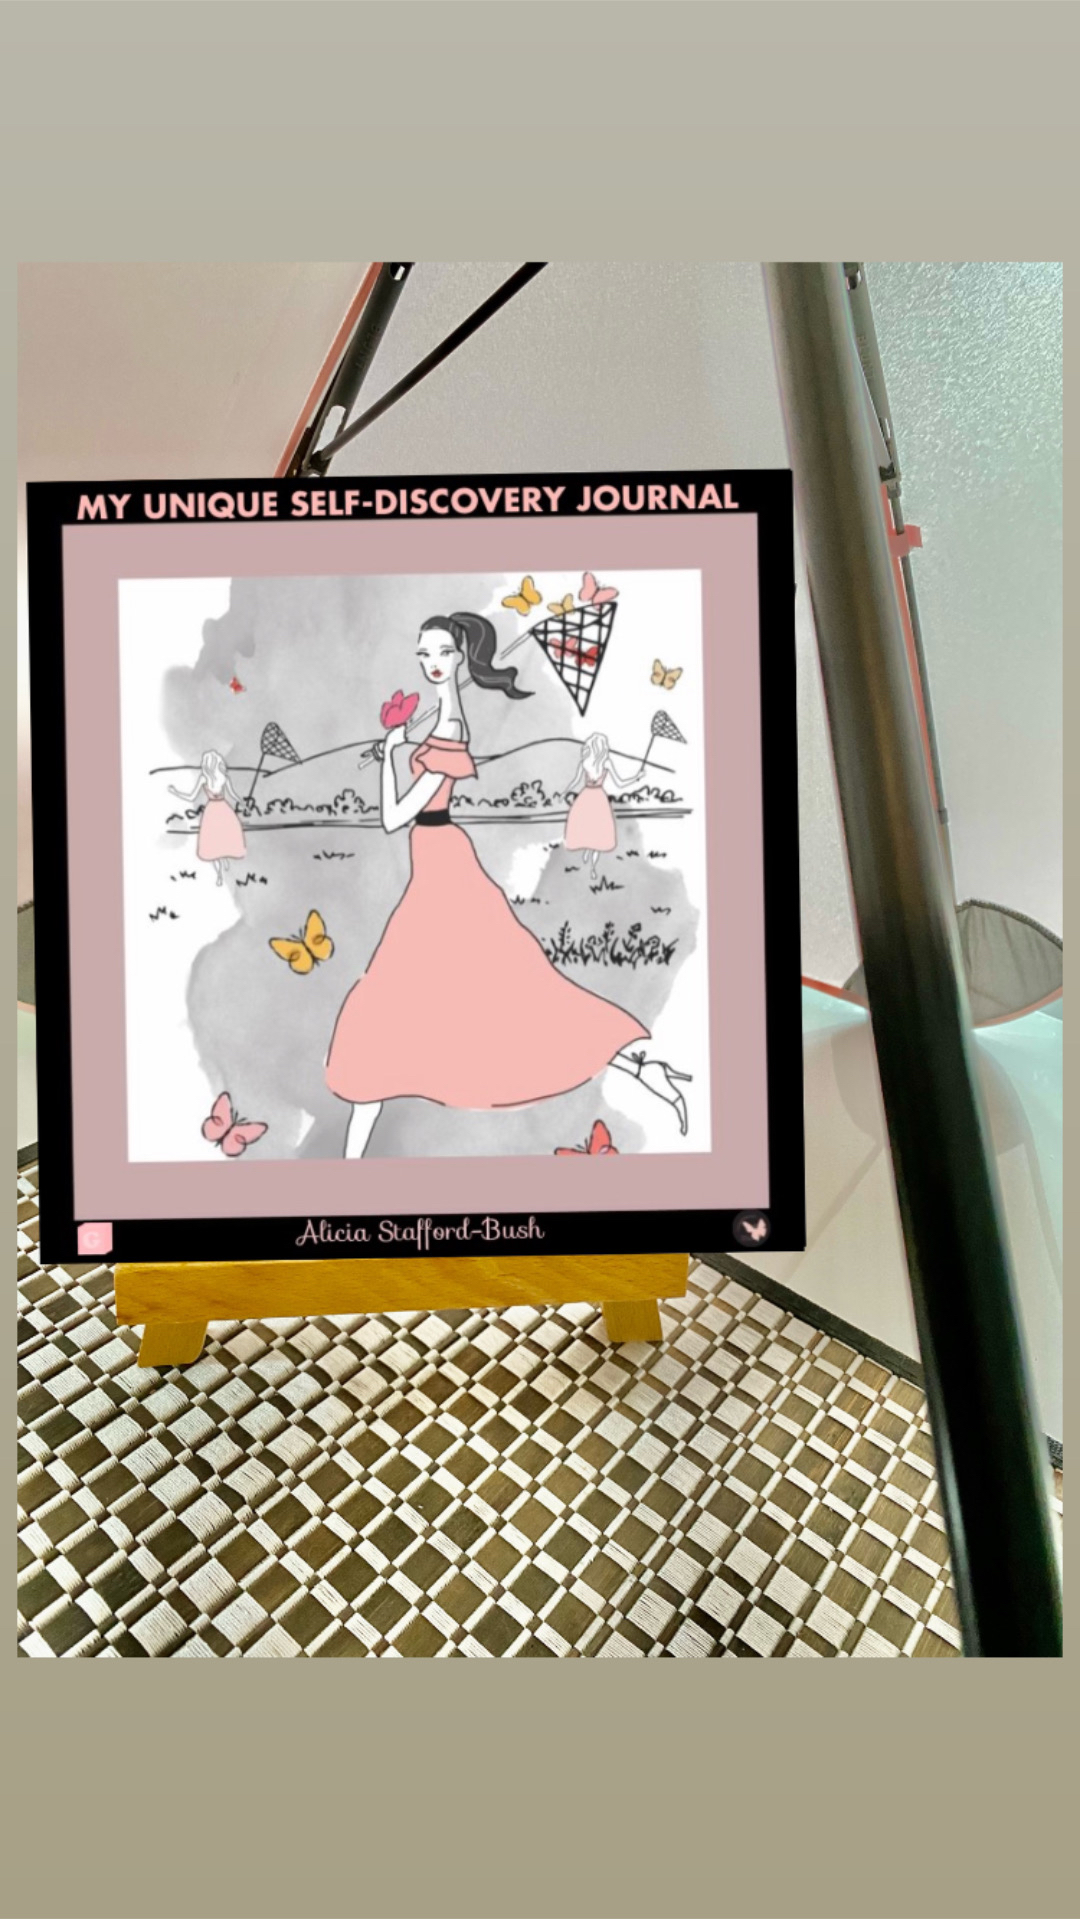 ‘MY UNIQUE SELF-DISCOVERY JOURNAL’  -  ferguered garney of anthet. imagination & self-truth to inspire the inspired! (G)